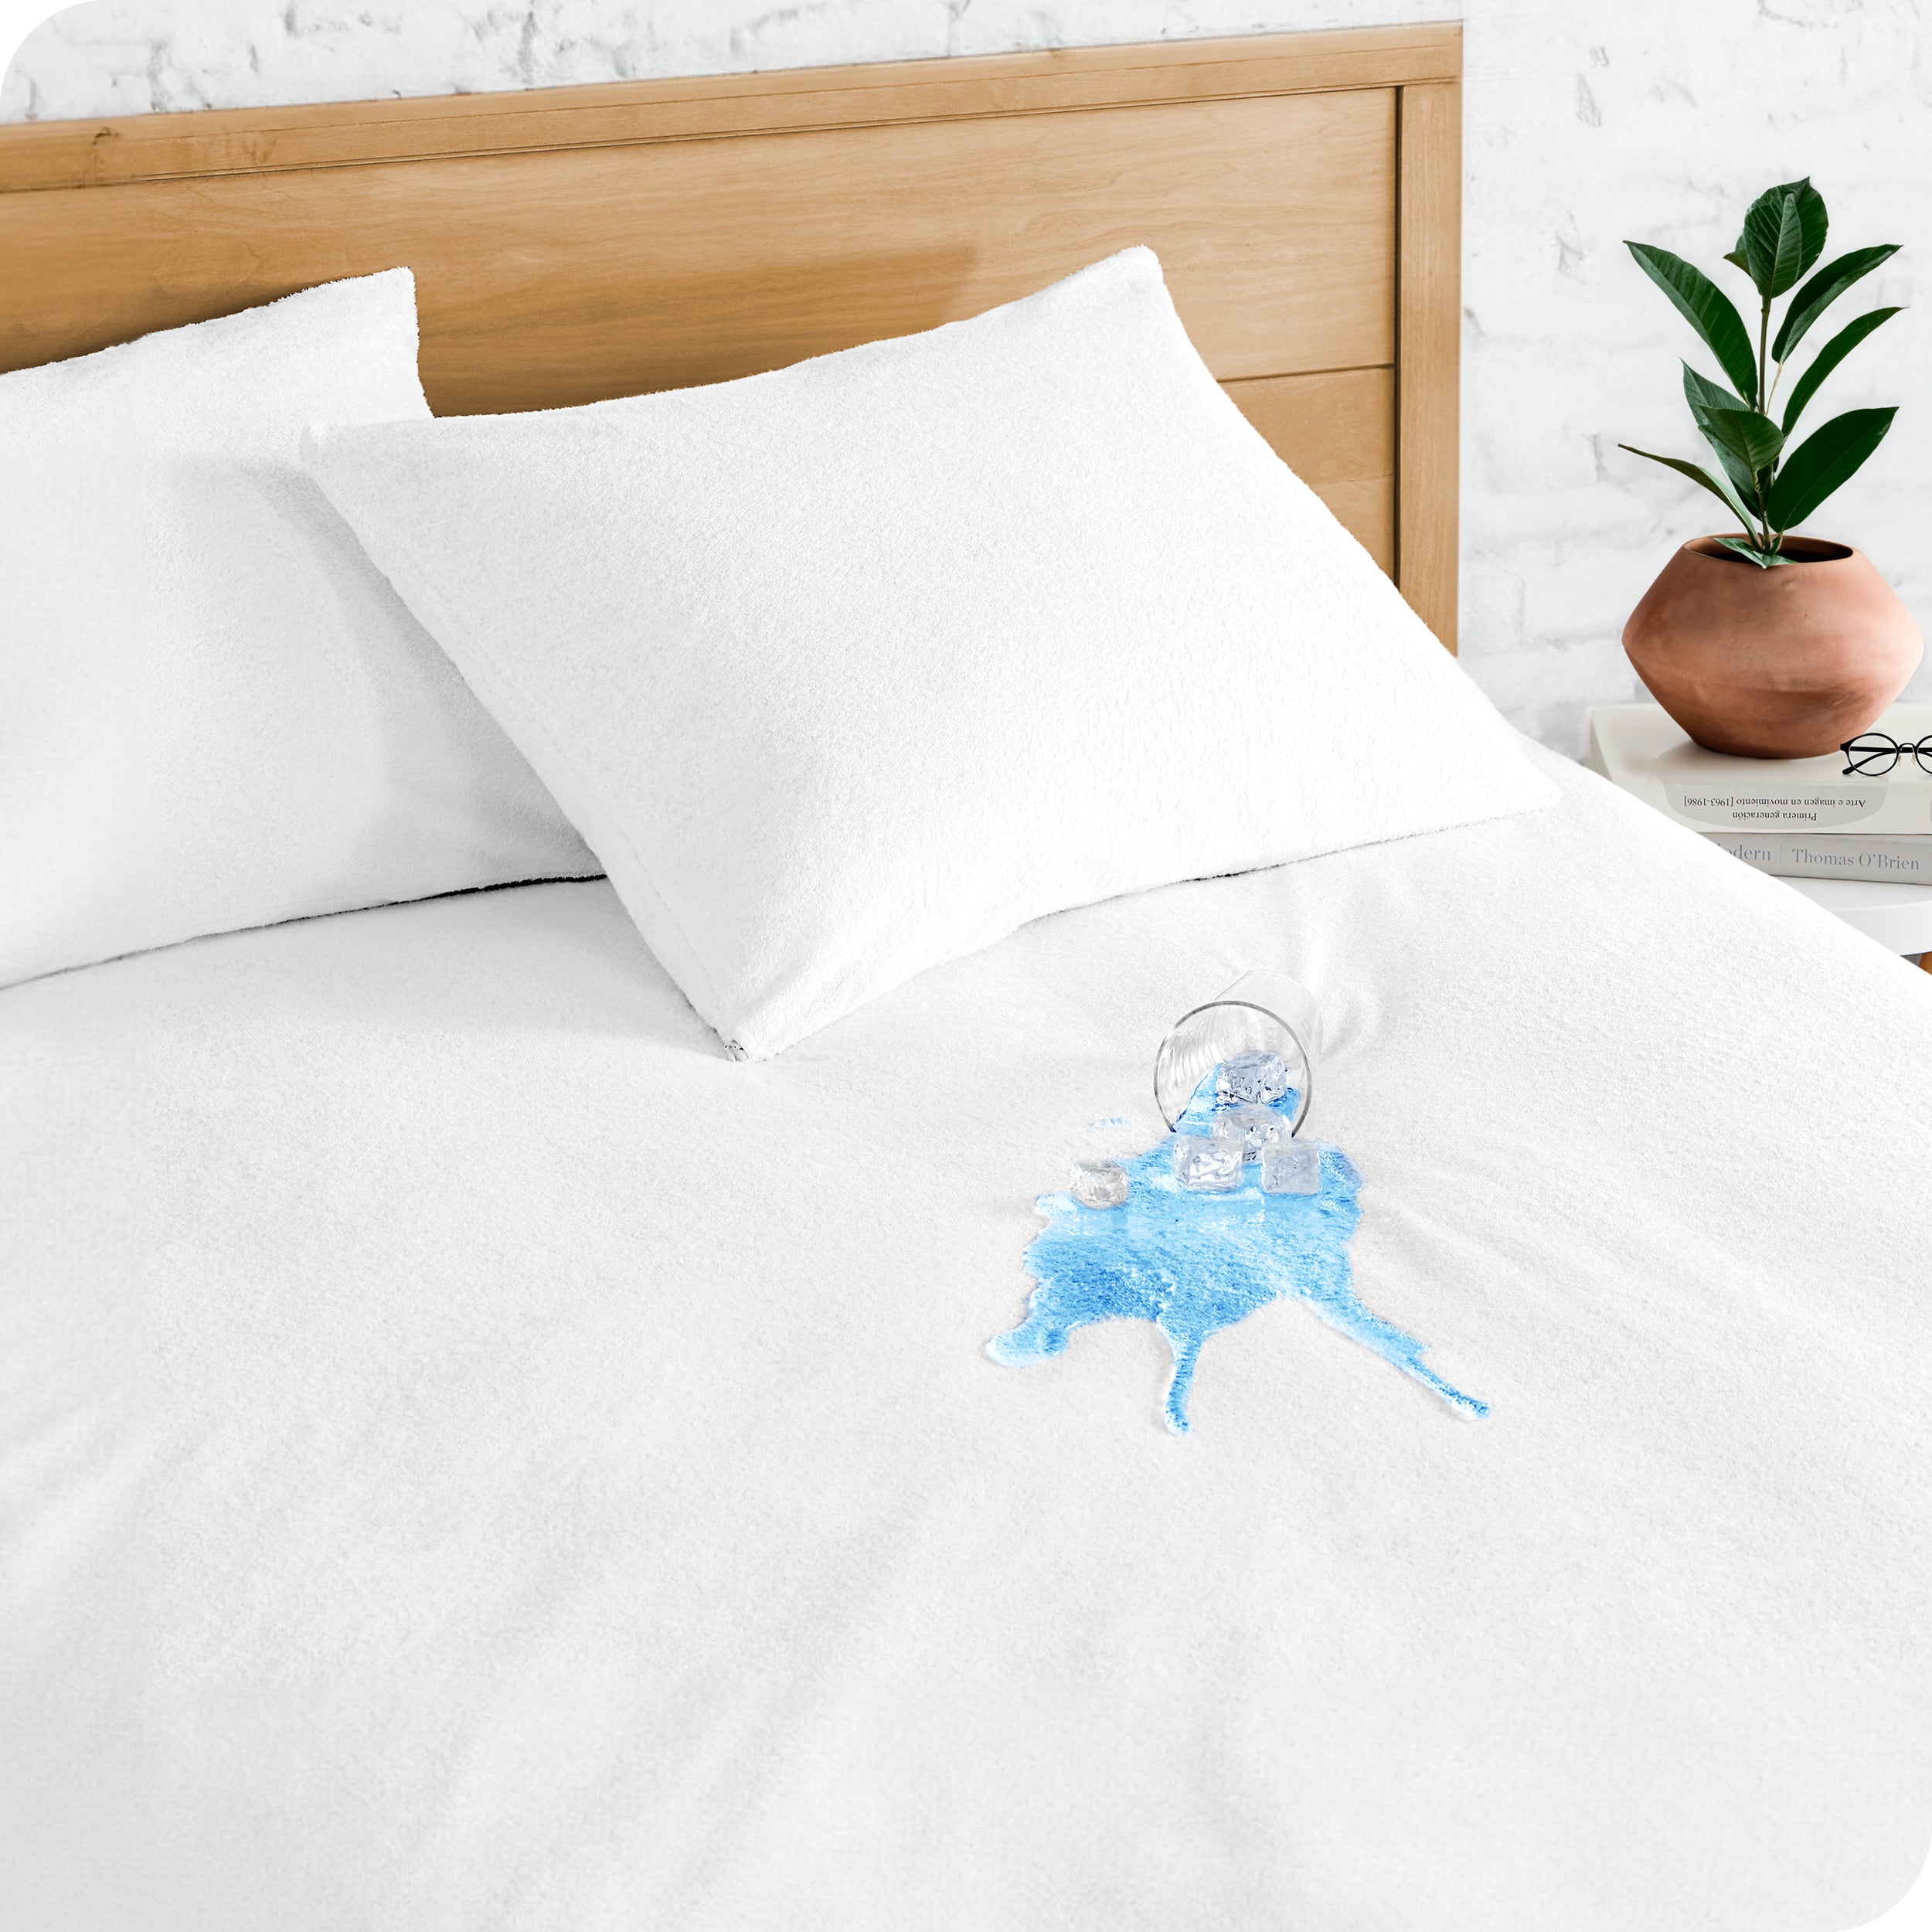 A glass of water spilled on a bed cover with a mattress protector